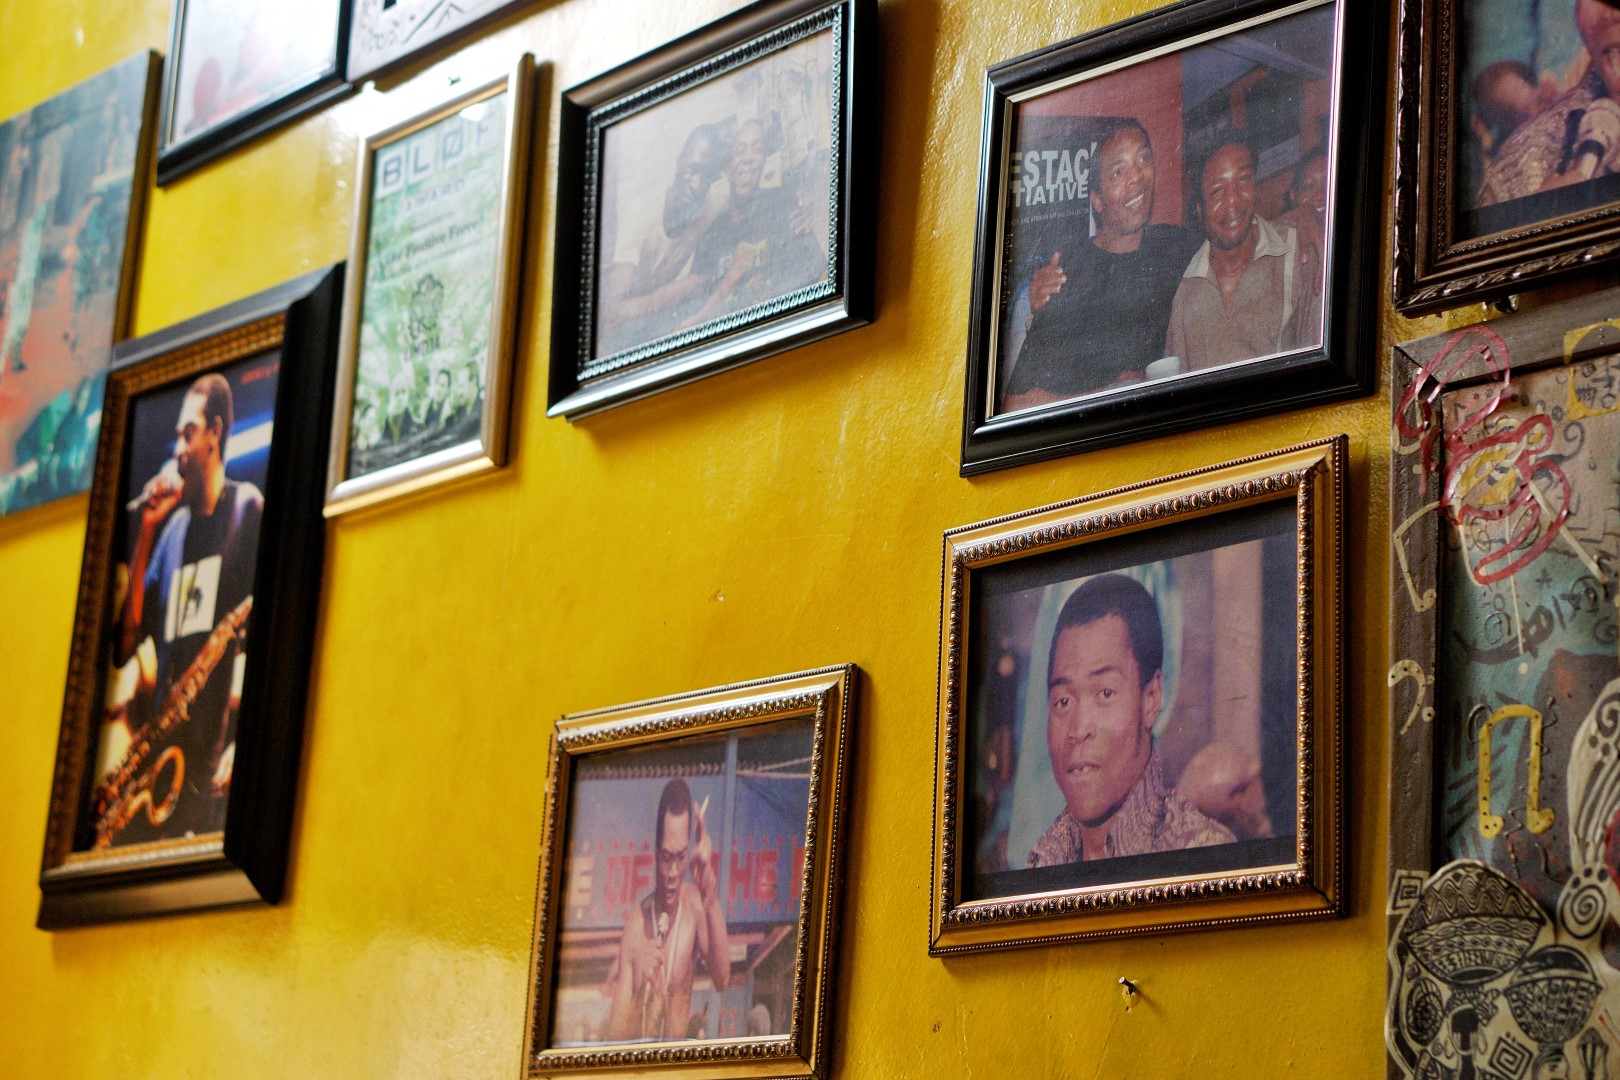 the picture wall at fela's shrine in ikeja lagos